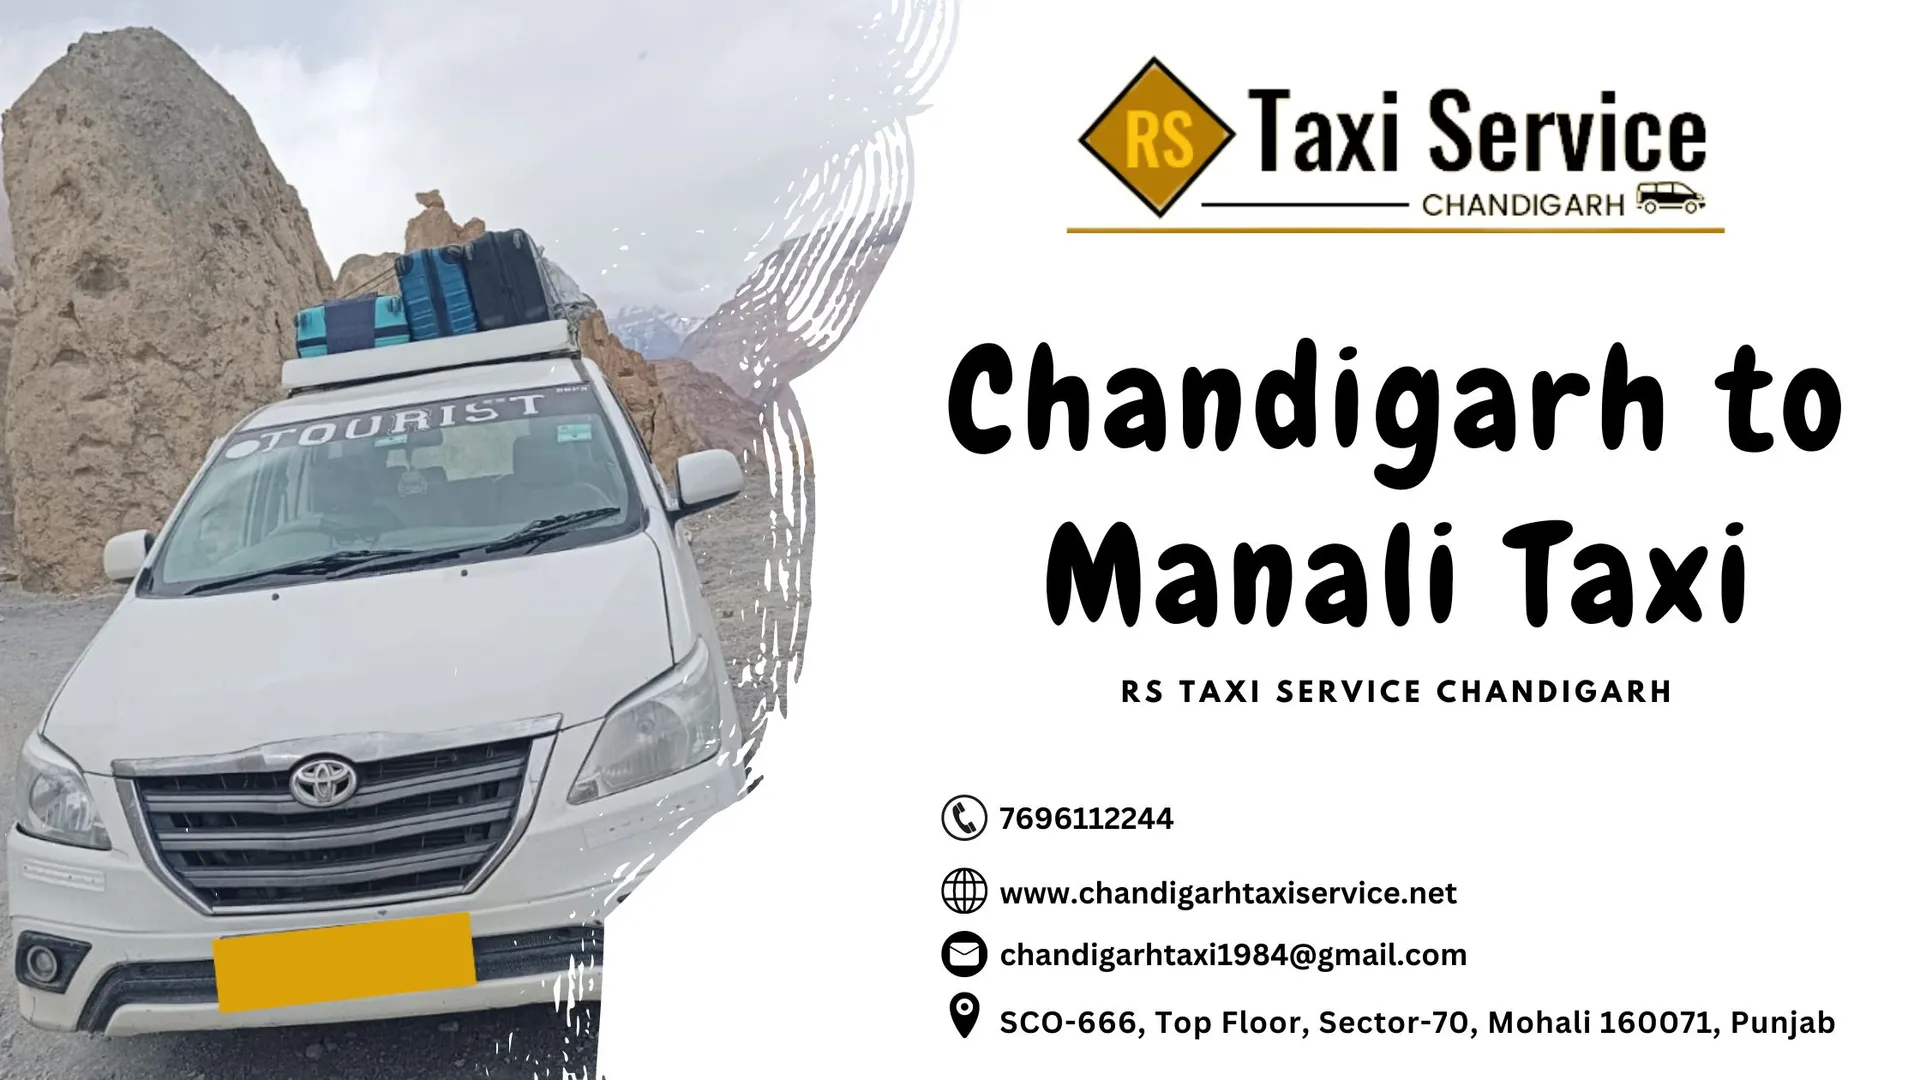 Experience the magnificence of the road as RS Taxi Service Chandigarh takes you on an unforgettable ride from Chandigarh to Manali. Our well-maintained fleet and experienced drivers ensure a safe and comfortable journey through picturesque landscapes.

Whether it's a family vacation or a solo adventure, our reliable taxi service guarantees a memorable trip. Punctuality is our priority, ensuring you reach your destination on time.

https://www.chandigarhtaxiservice.net/chandigarh-manali-taxi